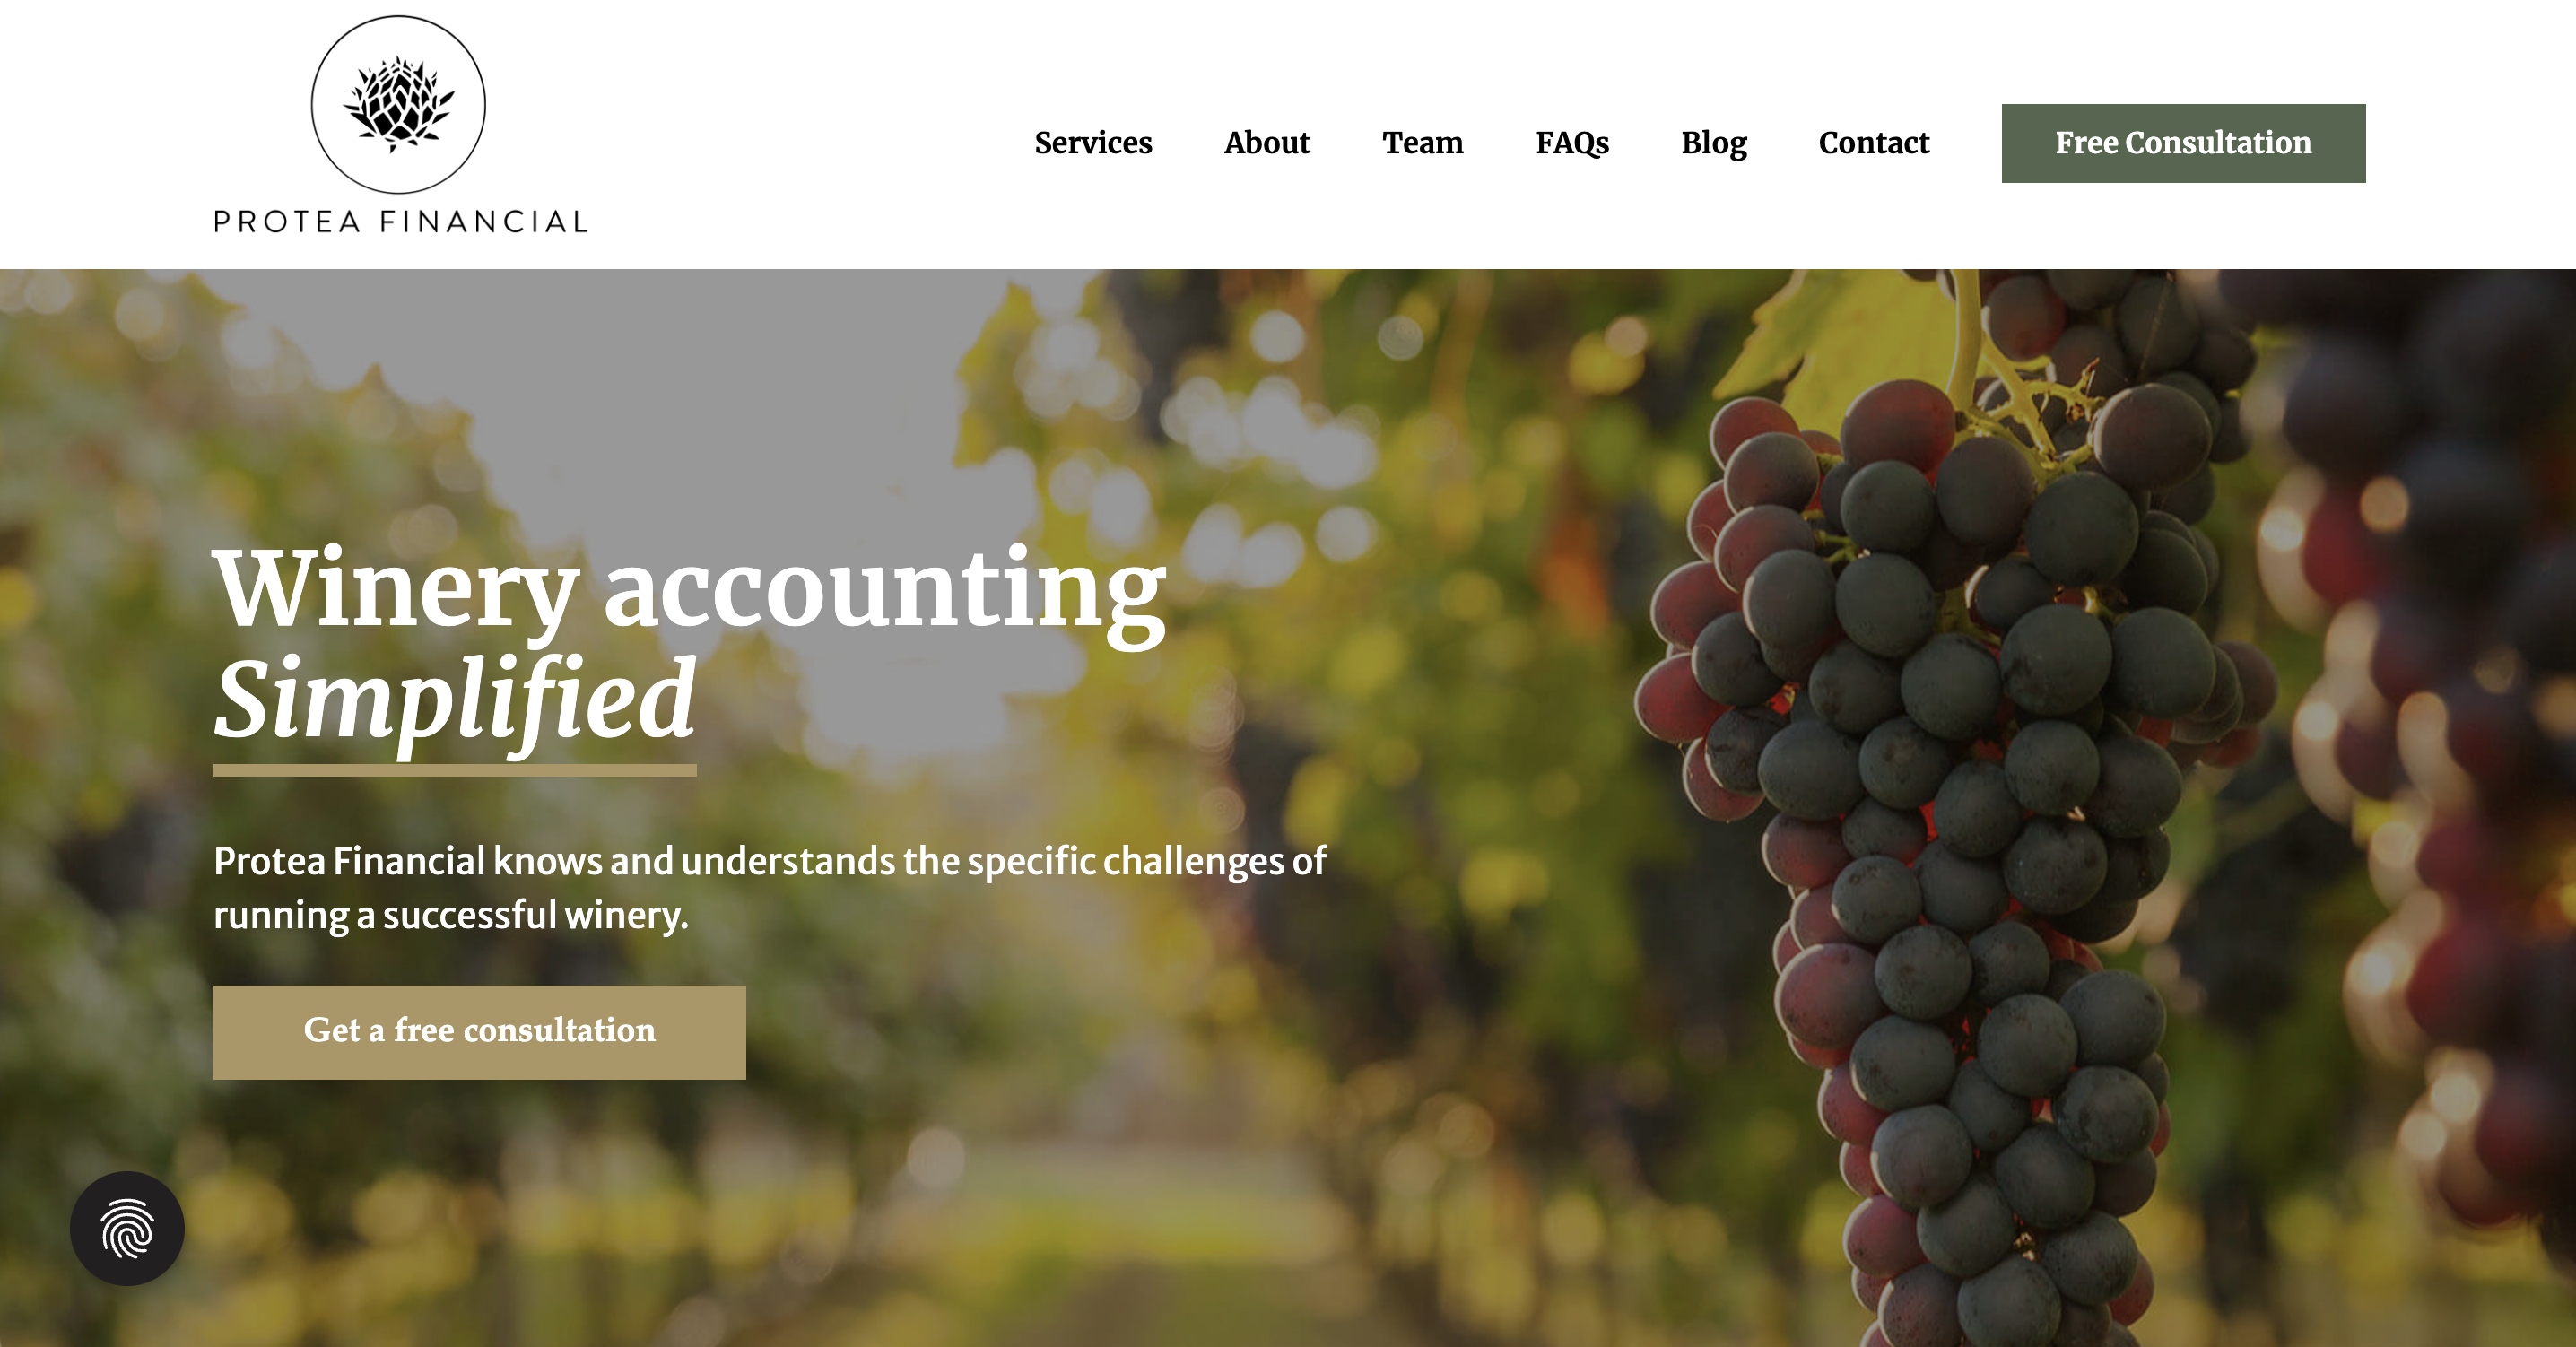 Protea Financial's website is a great example of an accounting firm being clear about their market niche.